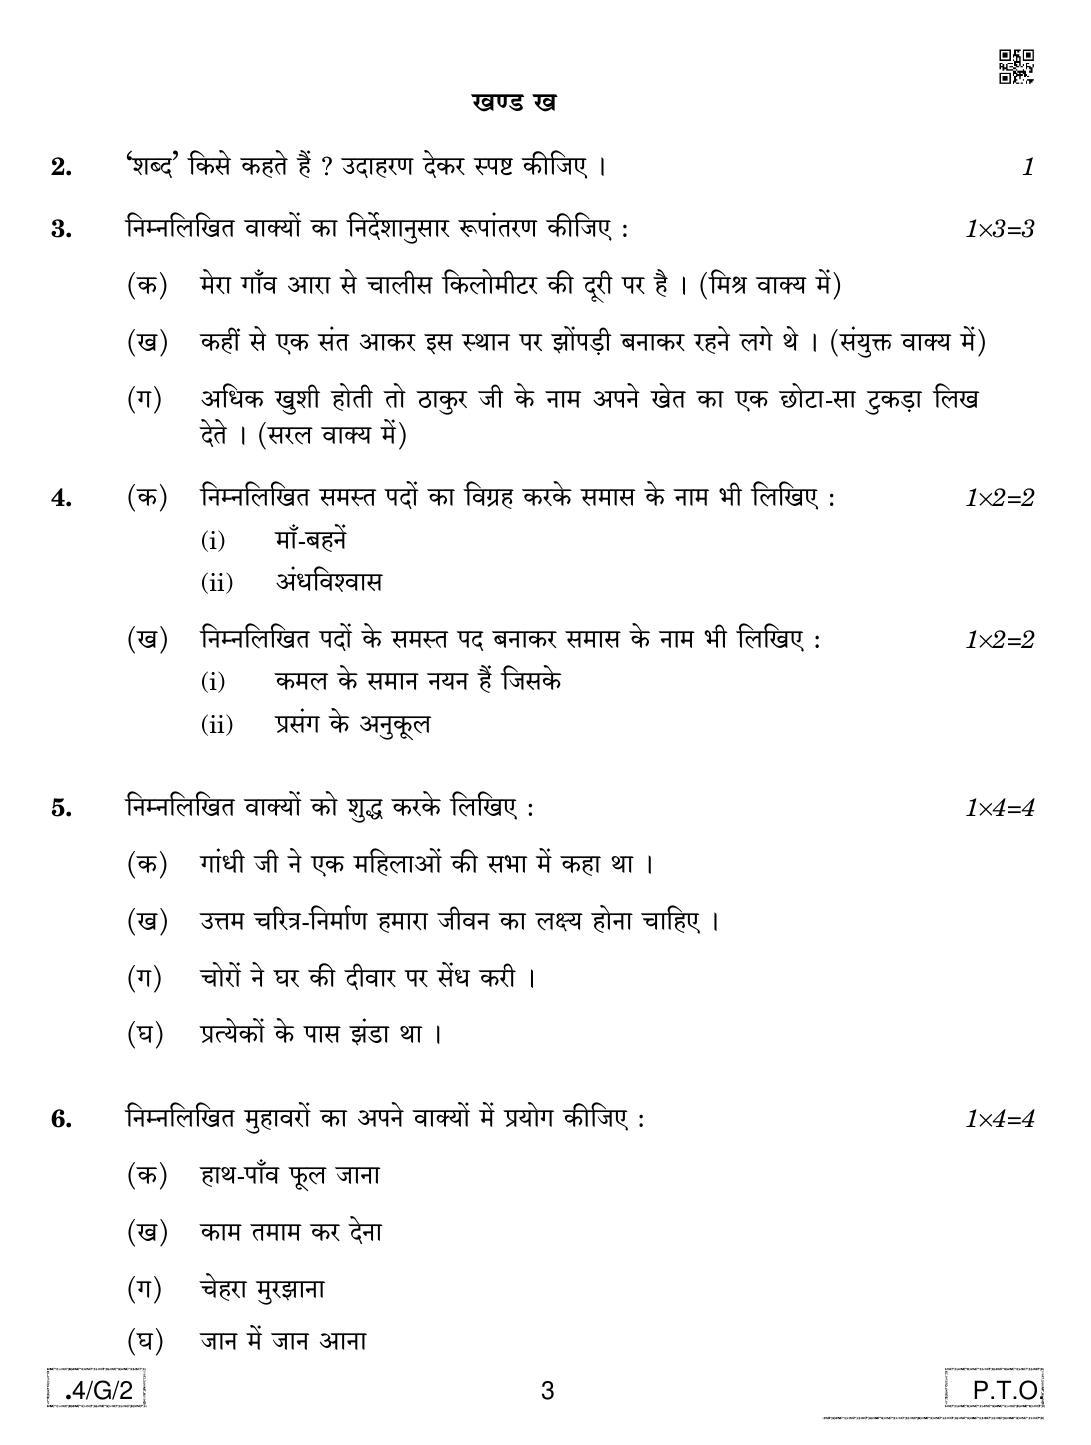 CBSE Class 10 4-C-2 Hindi B 2020 Compartment Question Paper - Page 3